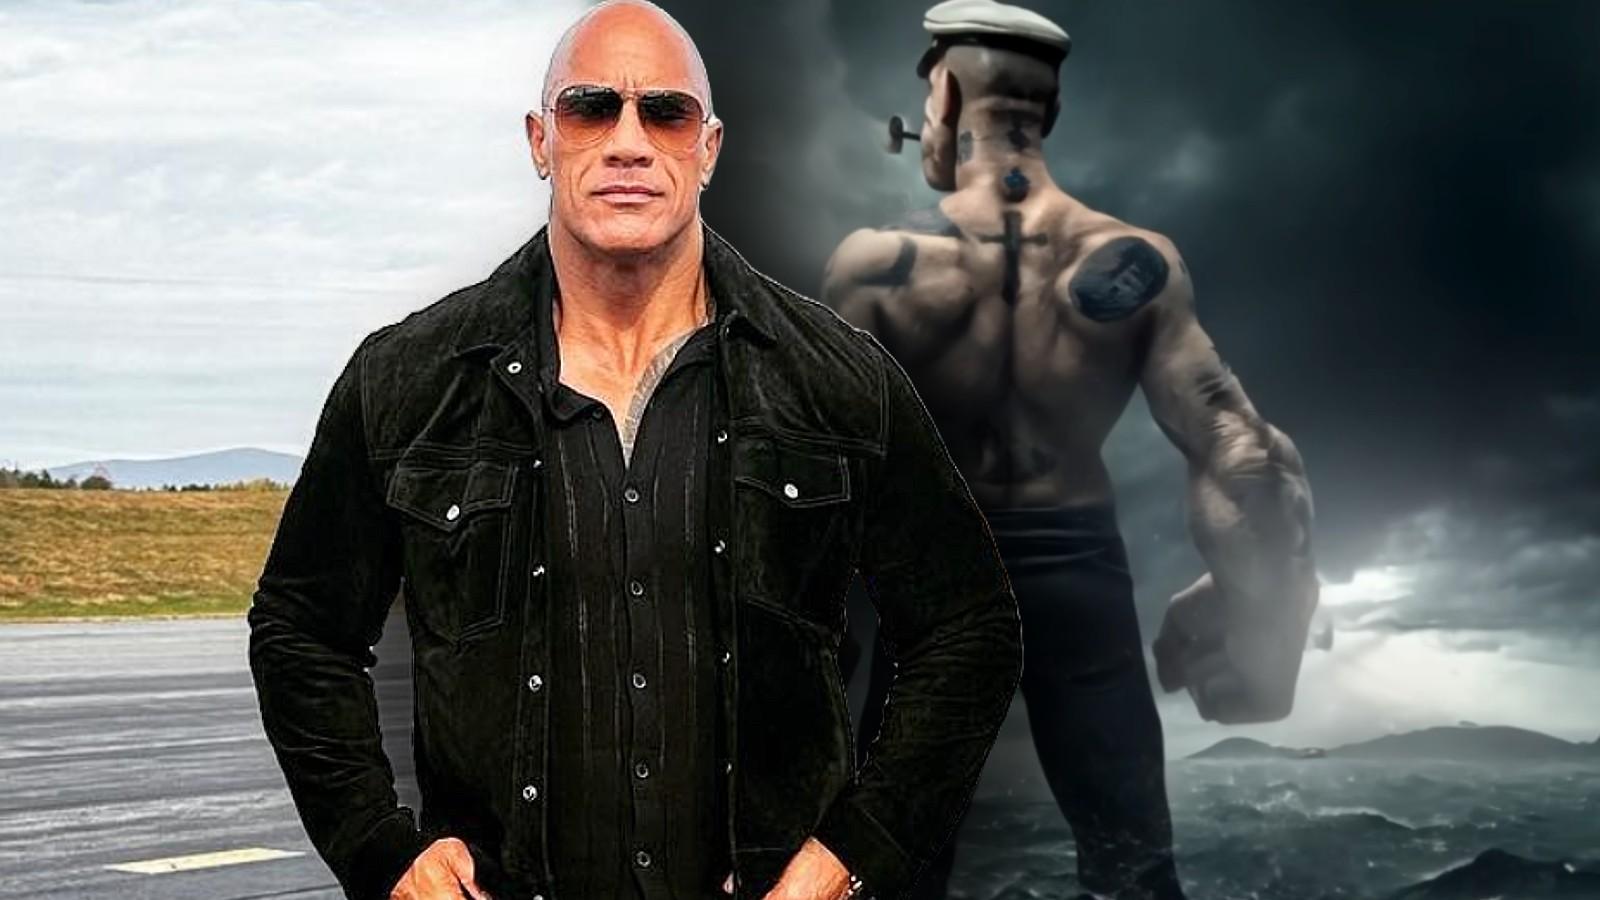 Dwayne 'The Rock' Johnson and the fake imagery from Popeye: The Sailor Man